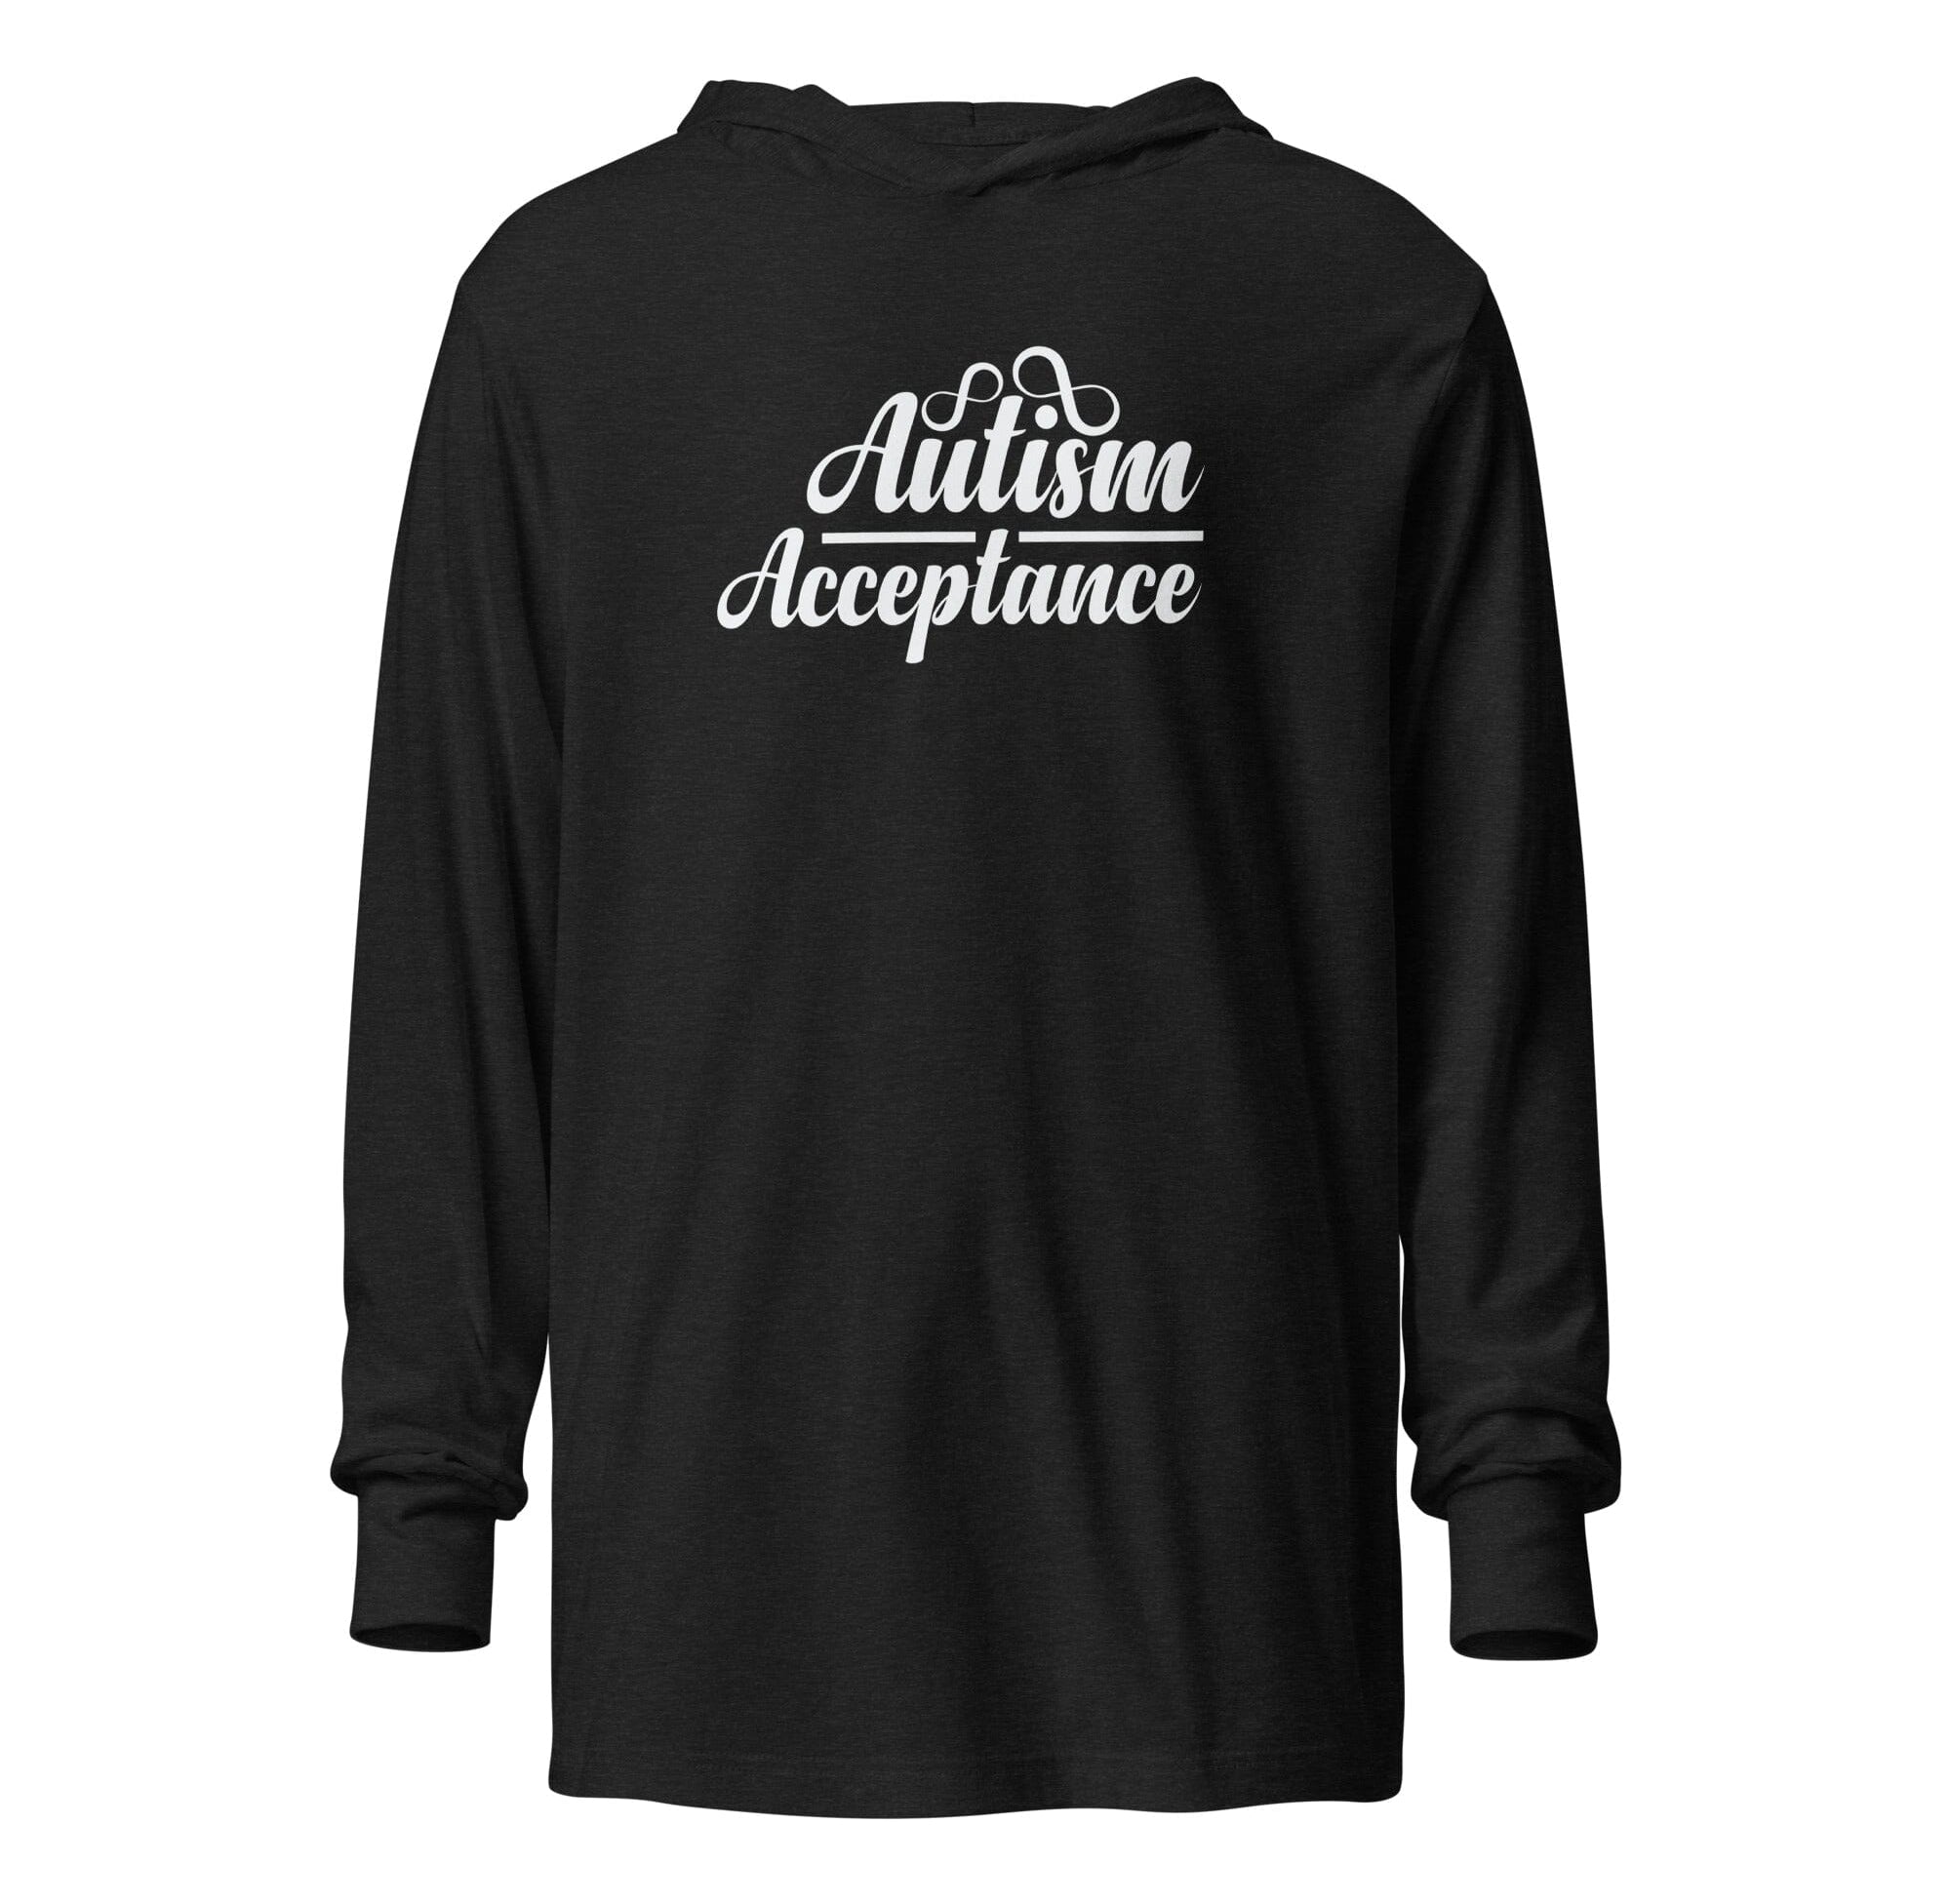 Autism Acceptance Unisex Hooded long-sleeve tee The Autistic Innovator Charcoal-Black Triblend XS 